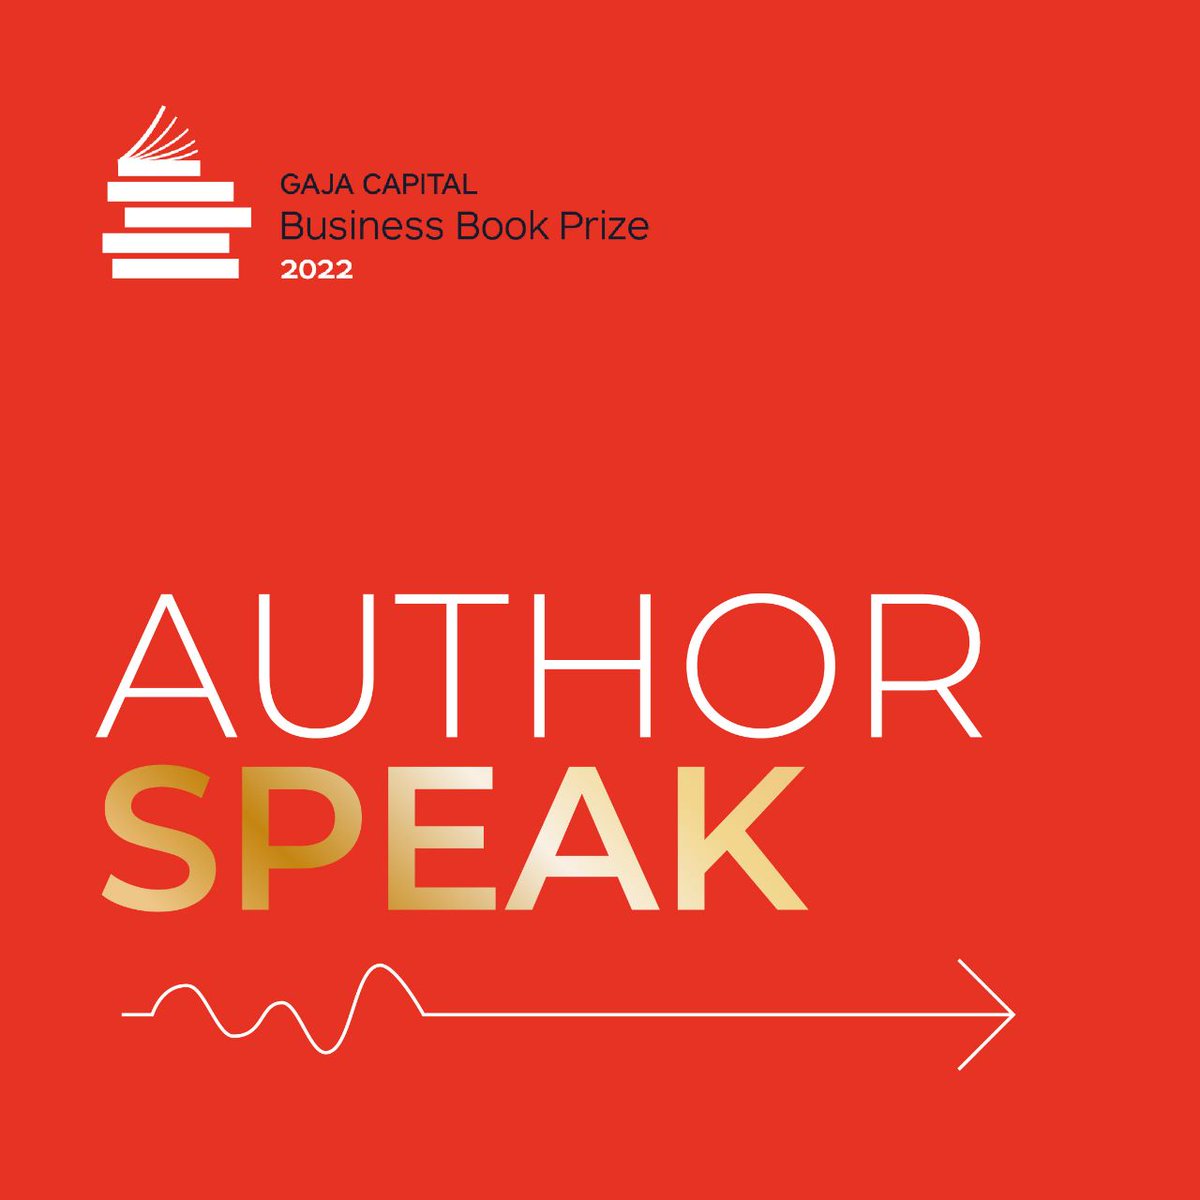 It's the final countdown,
One day to know who the winner of the Gaja Capital Business Book Prize is!
Stay tuned for this one!

#authorspeak #gajacapitalbusinessbookprize #HarperCollinsIndia #PenguinIndia